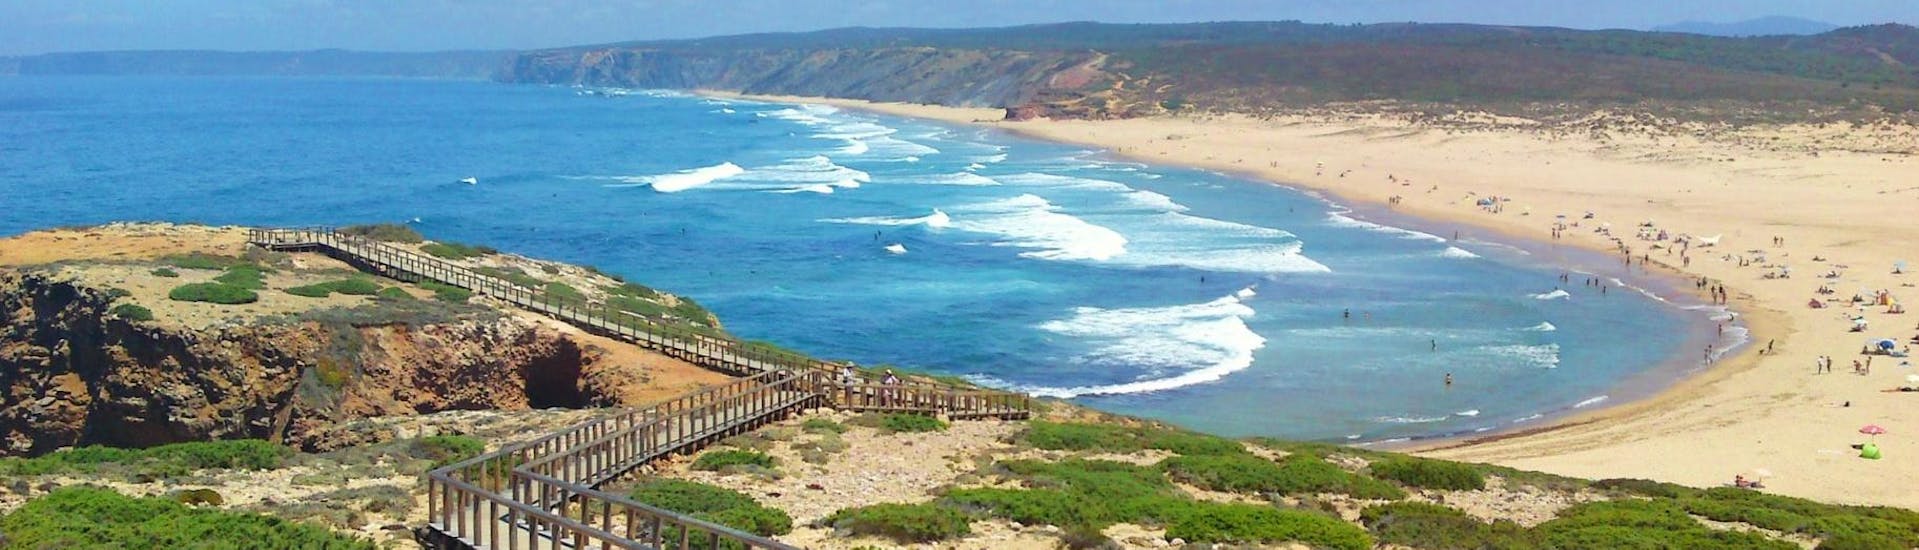 View over one of the beaches of the Costa Vicentina, where Neptunos Surf School Algarve is offering their surfing lessons.